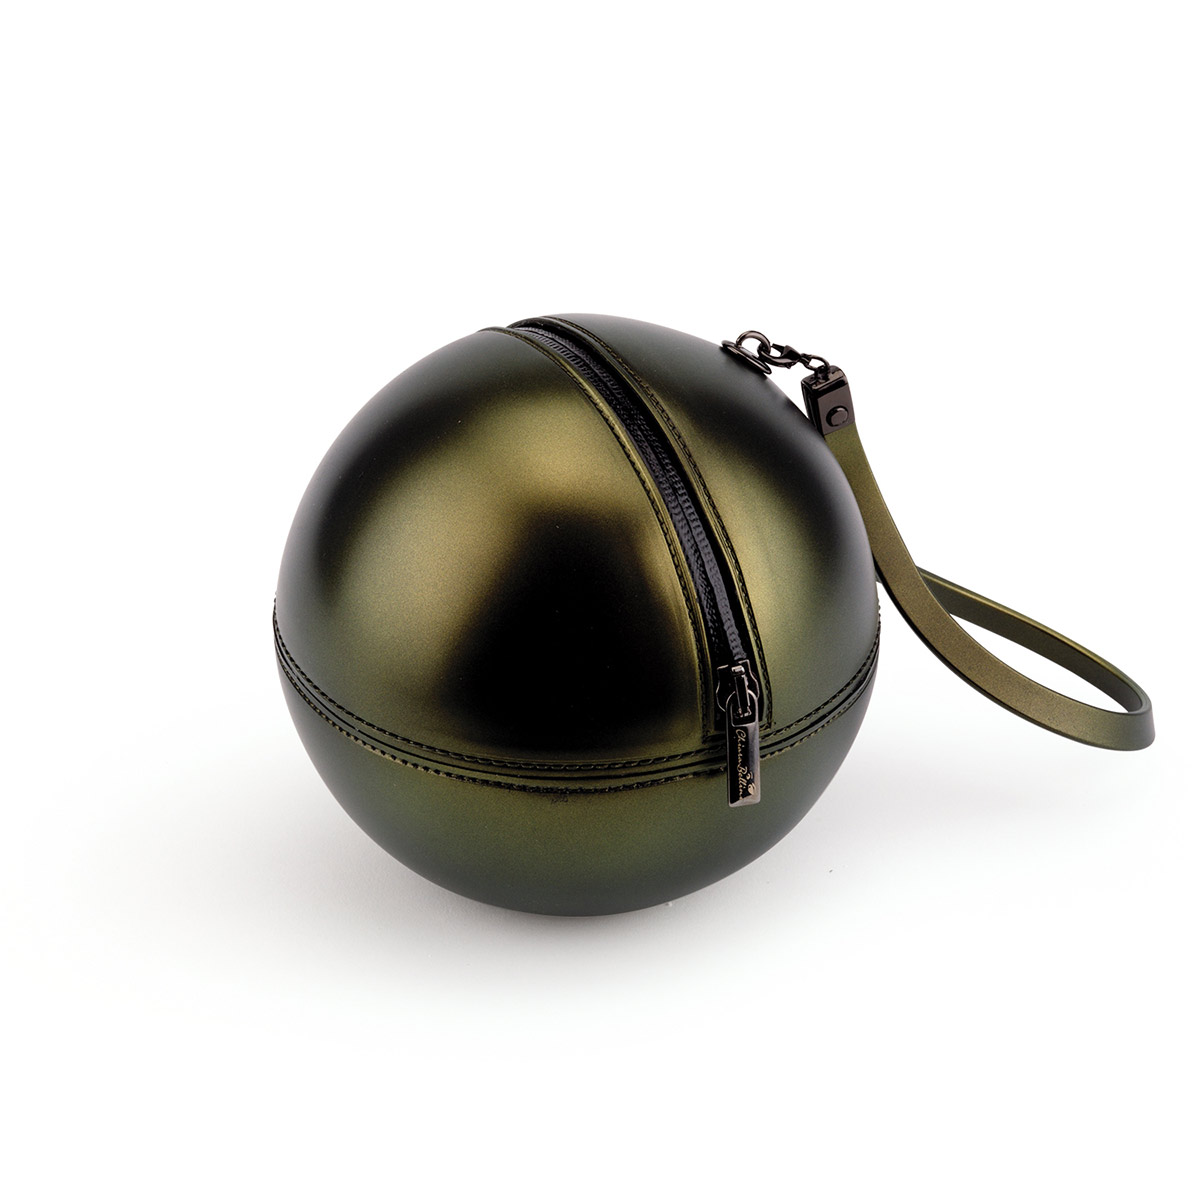 Sphere Bag in Pvc with iridescent effect